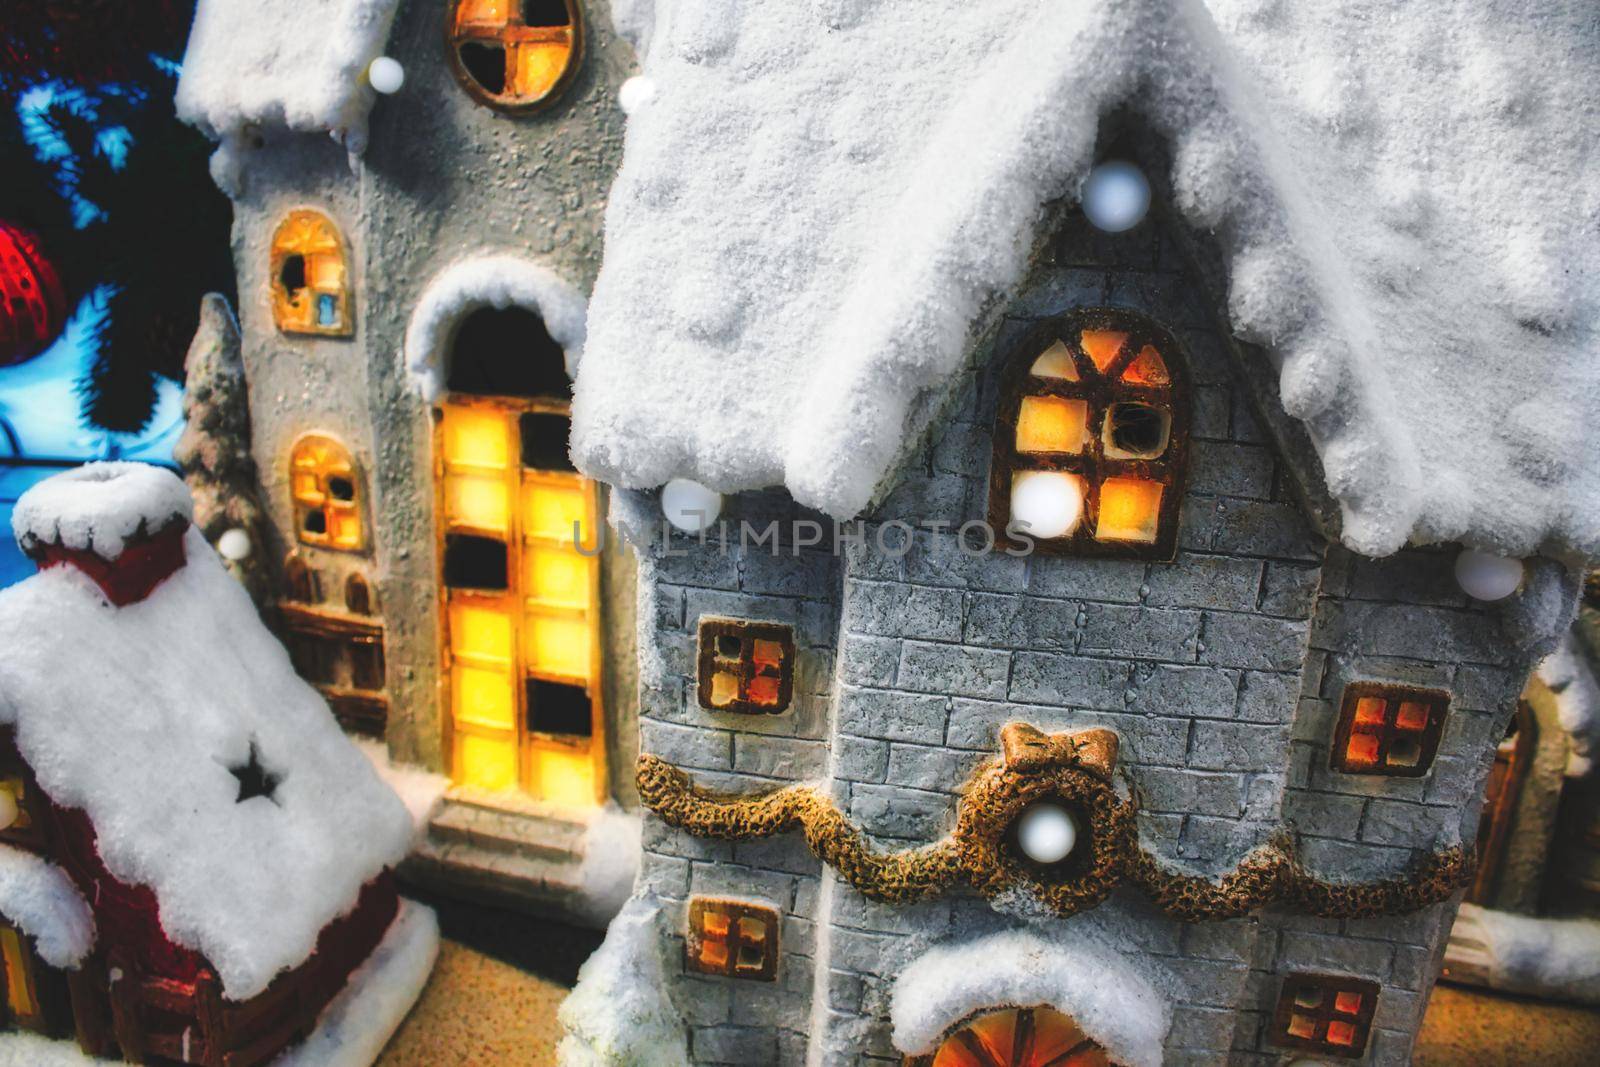 Toy Christmas village with miniature houses covered in snow